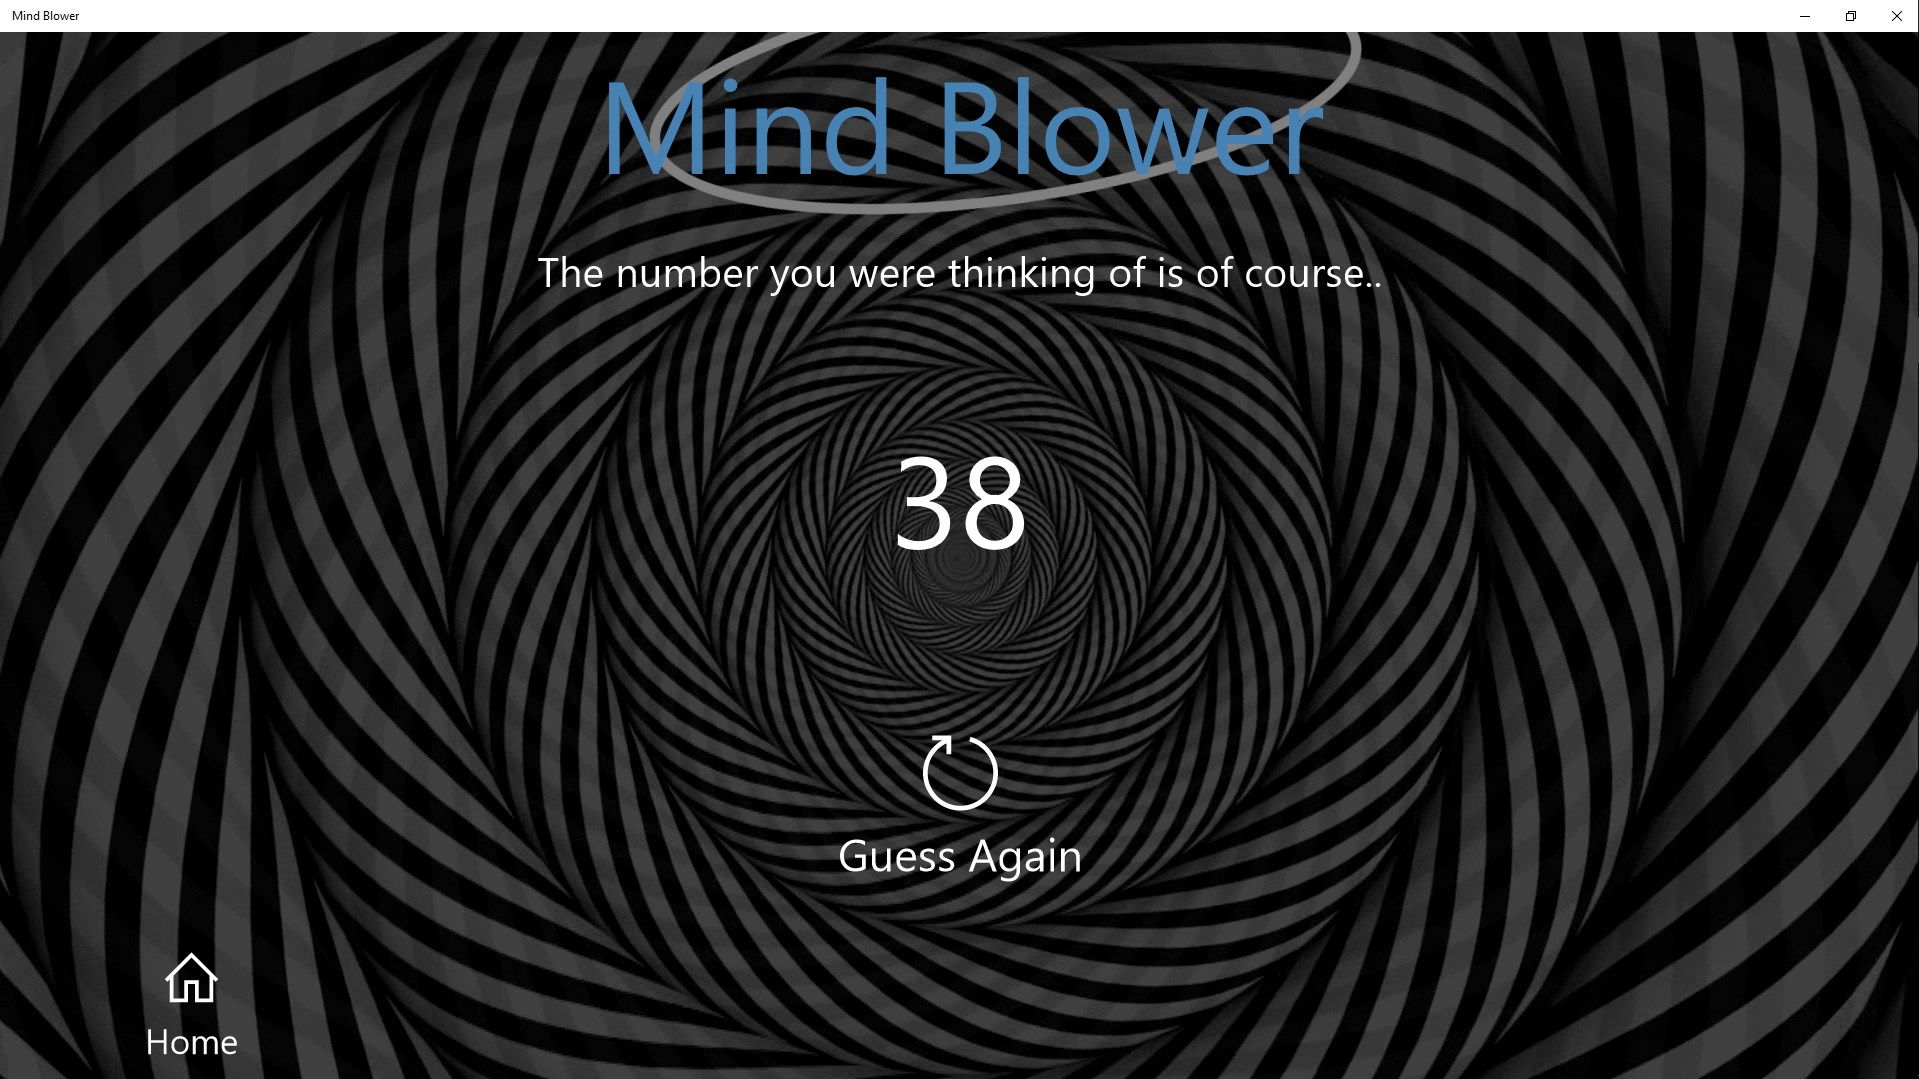 Mind Blower finds correctly the number that user had in their mind